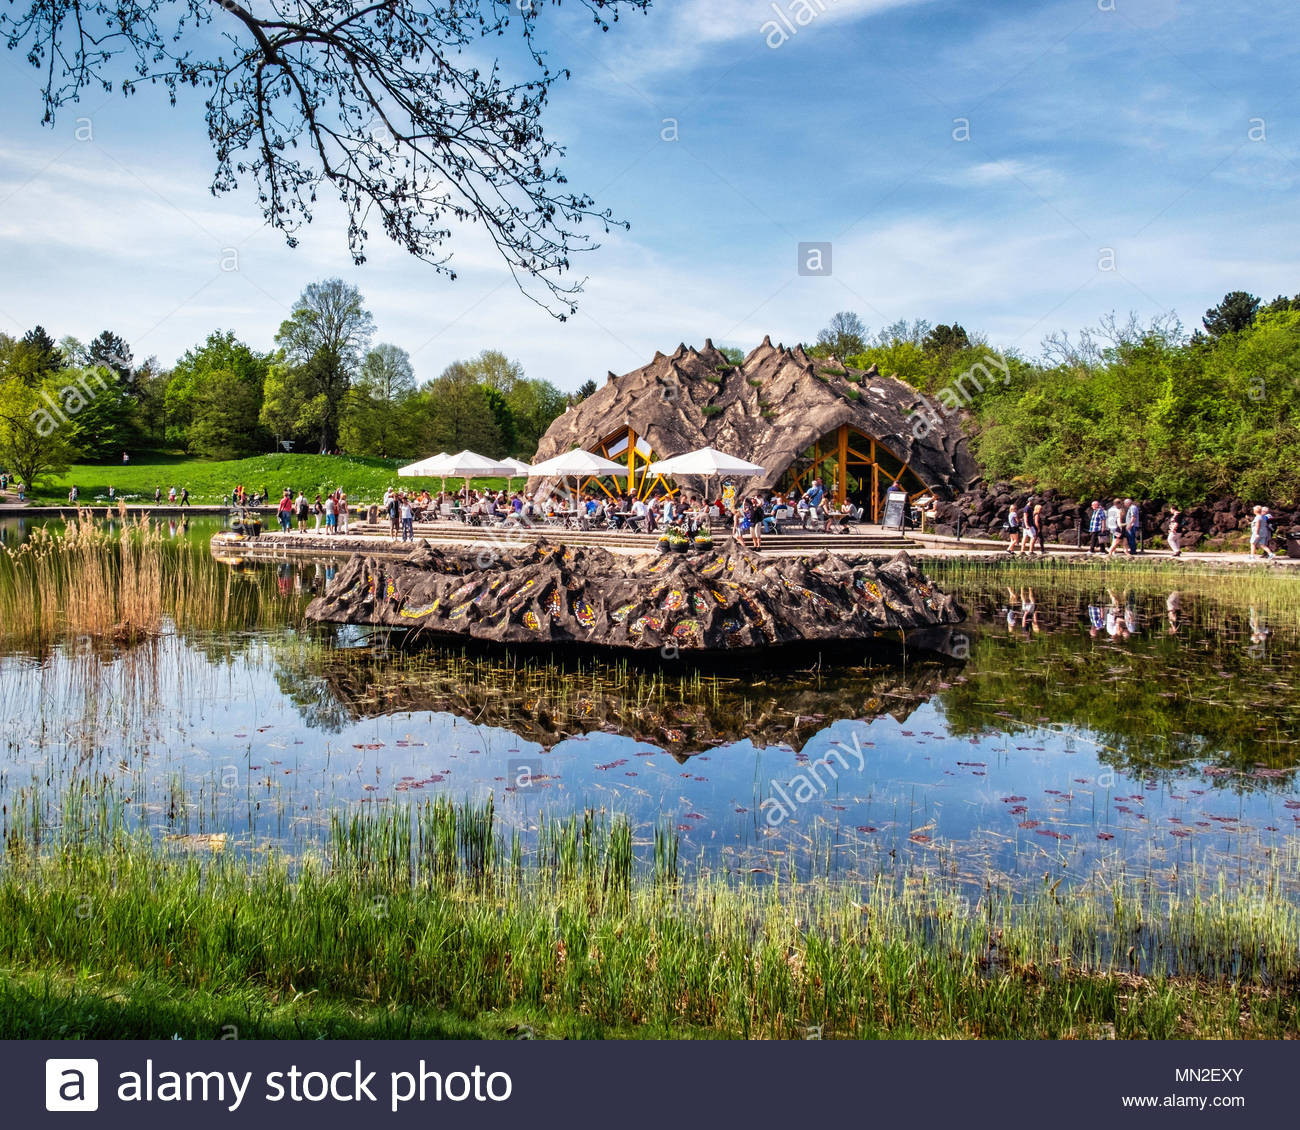 Cafe Am See Britzer Garten
 People Dine Outdoor Cafe In Stock s & People Dine